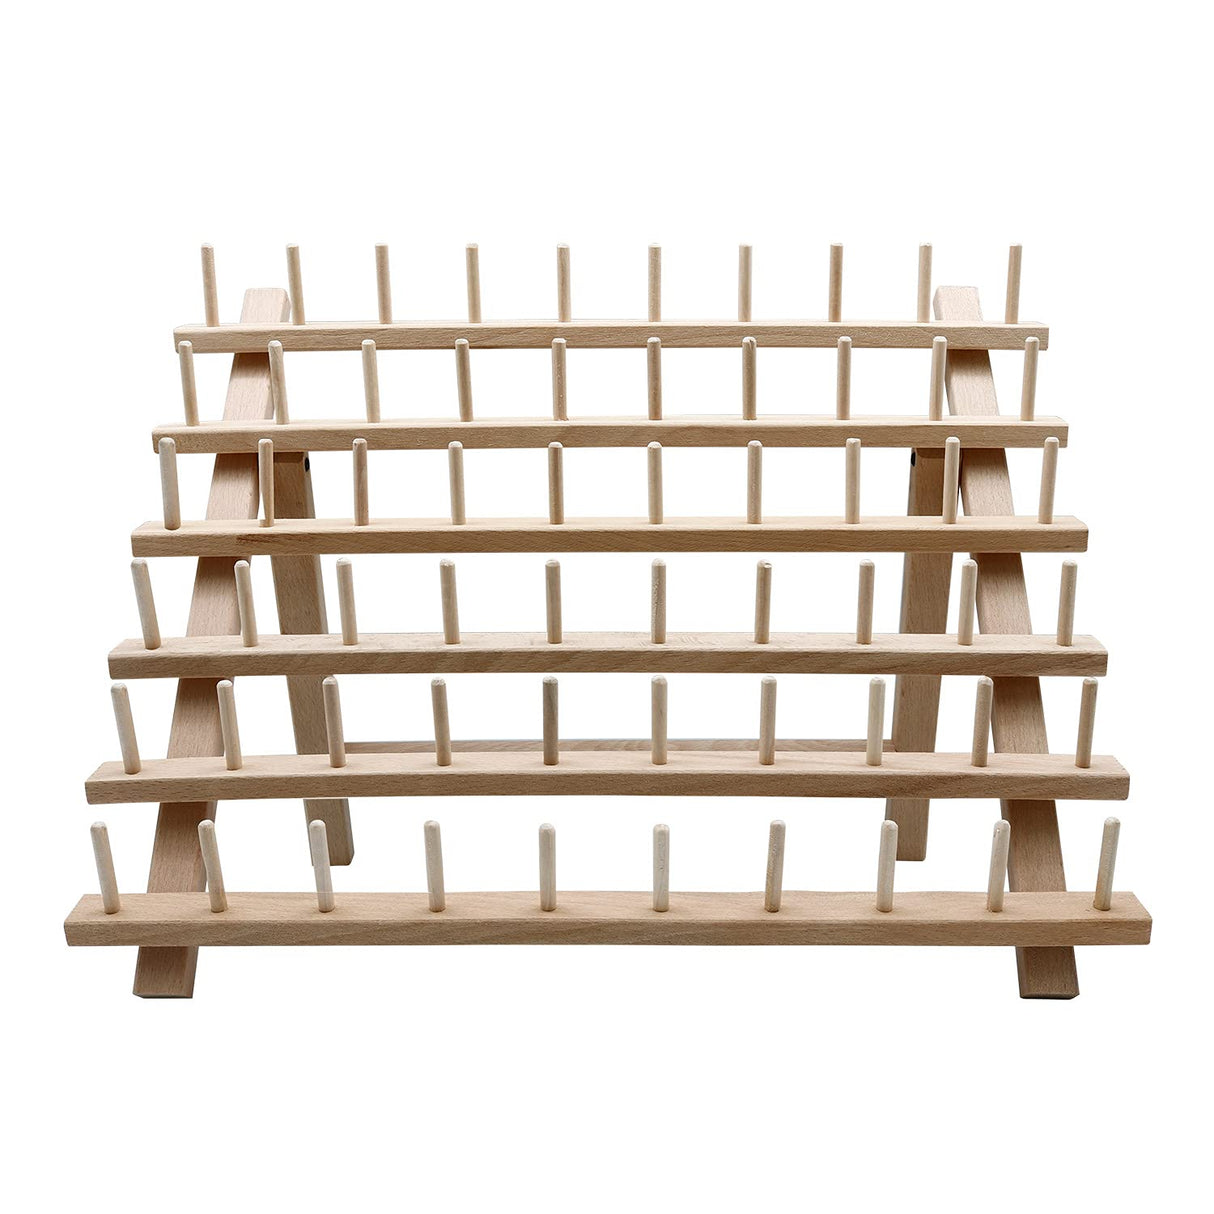 STUDIO LIMITED Braiding Hair Rack, 60 Spool Wooden Braiding Hair Holde –  Find Your New Look Today!